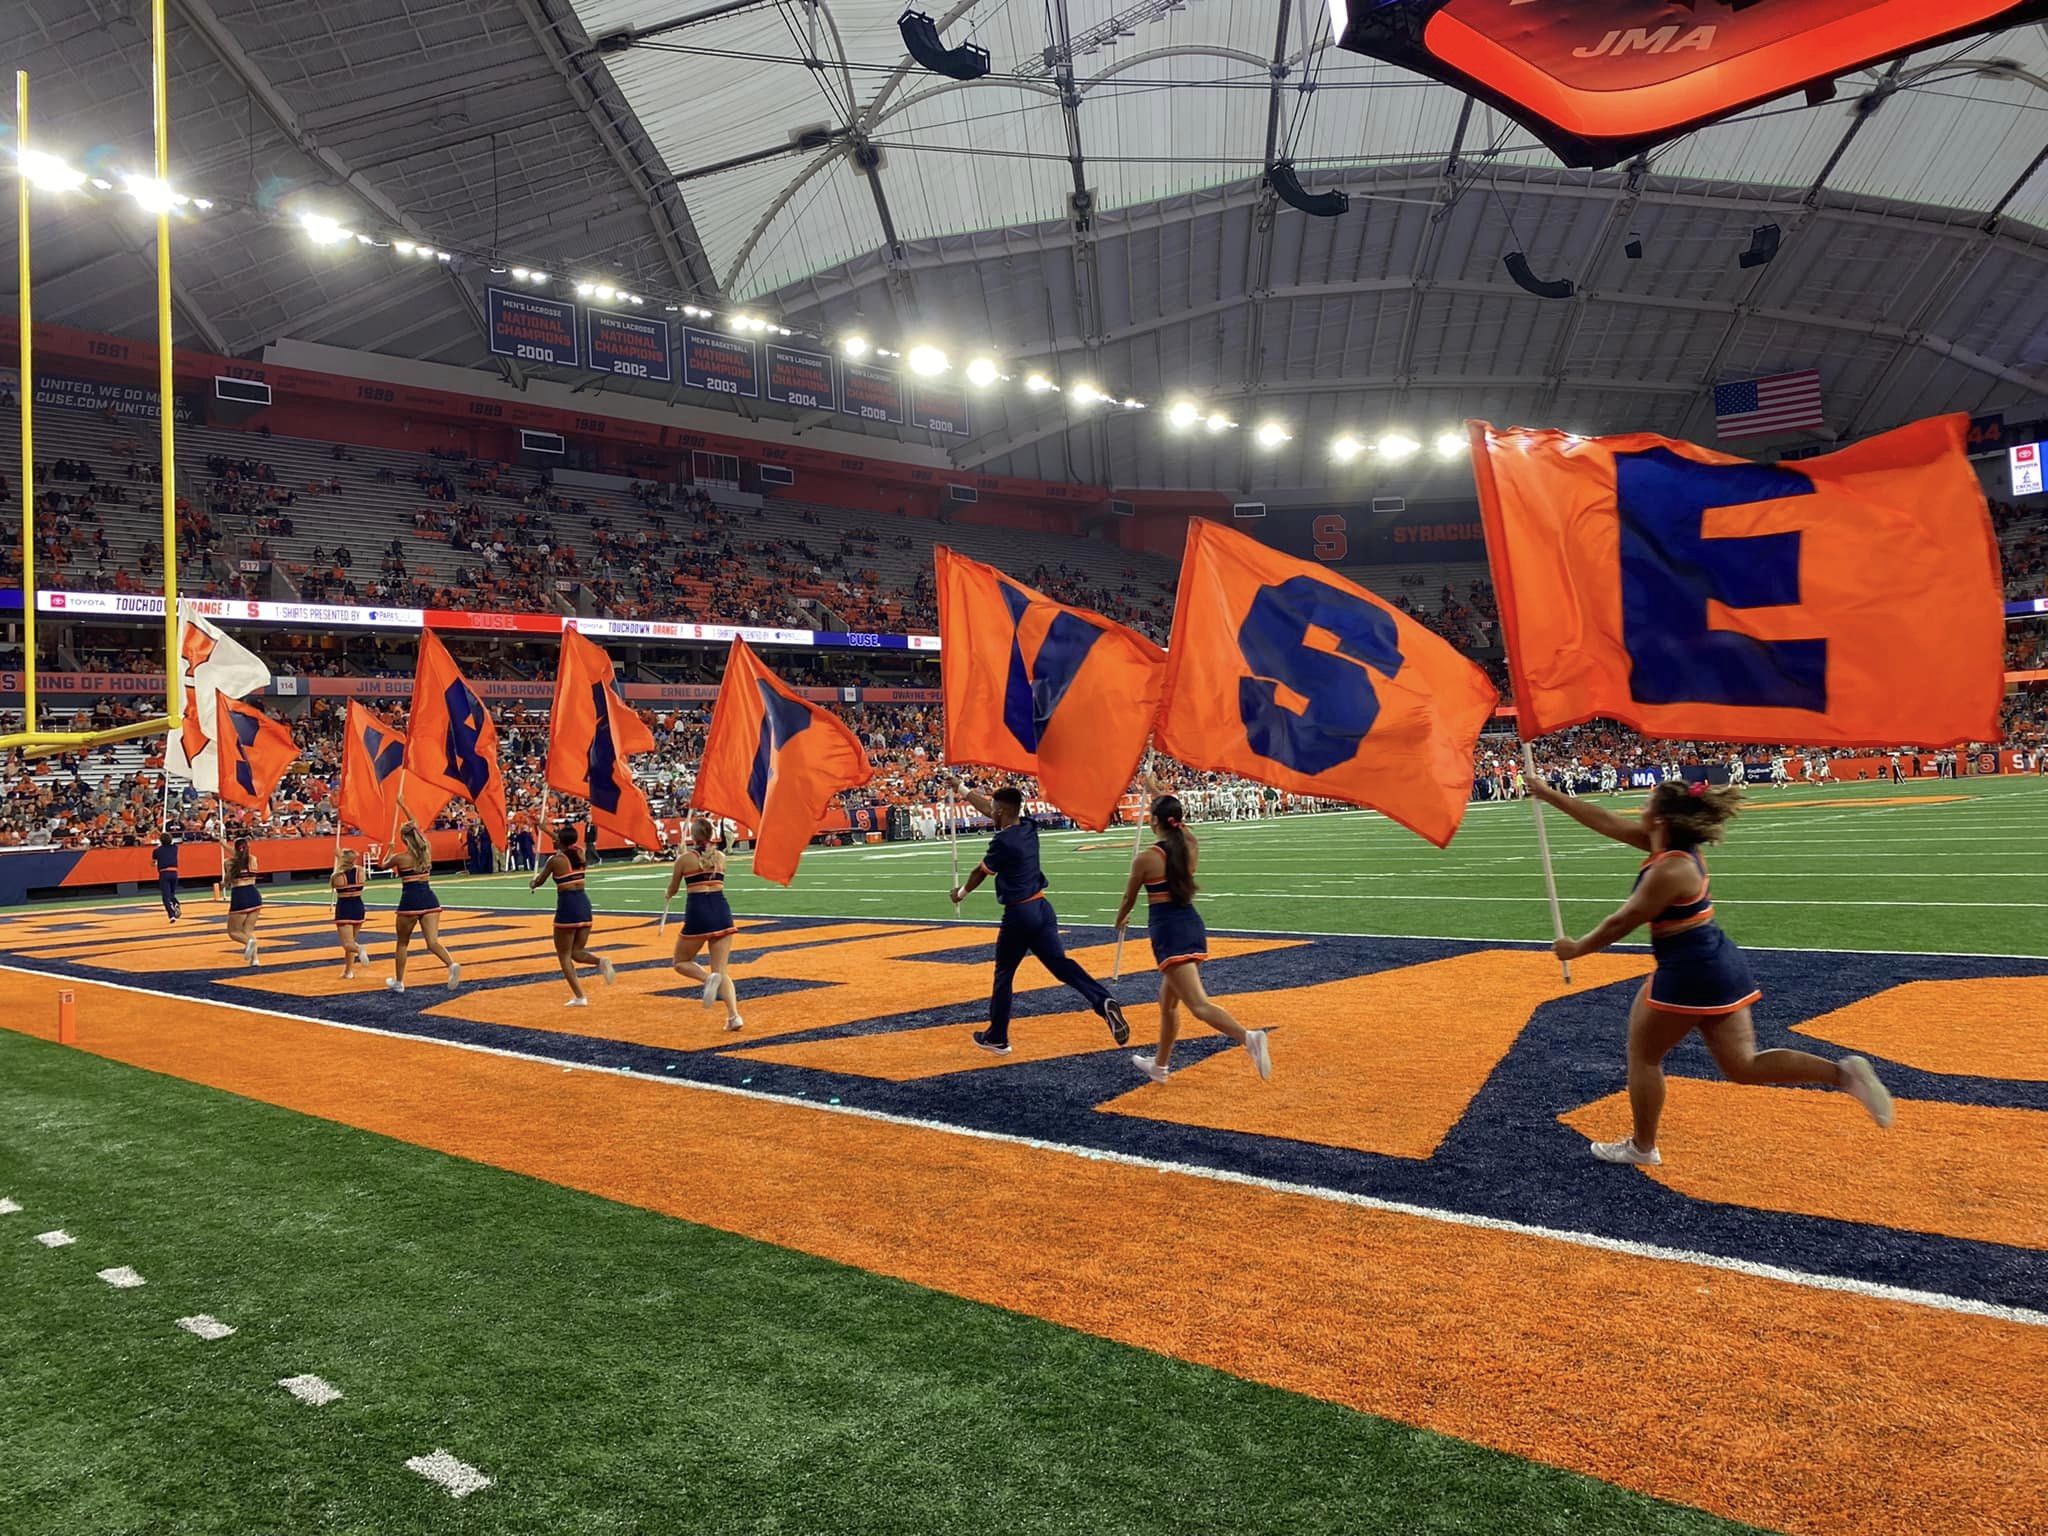 Cheerleaders on the JMA Wireless Dome field with Syracuse University flags